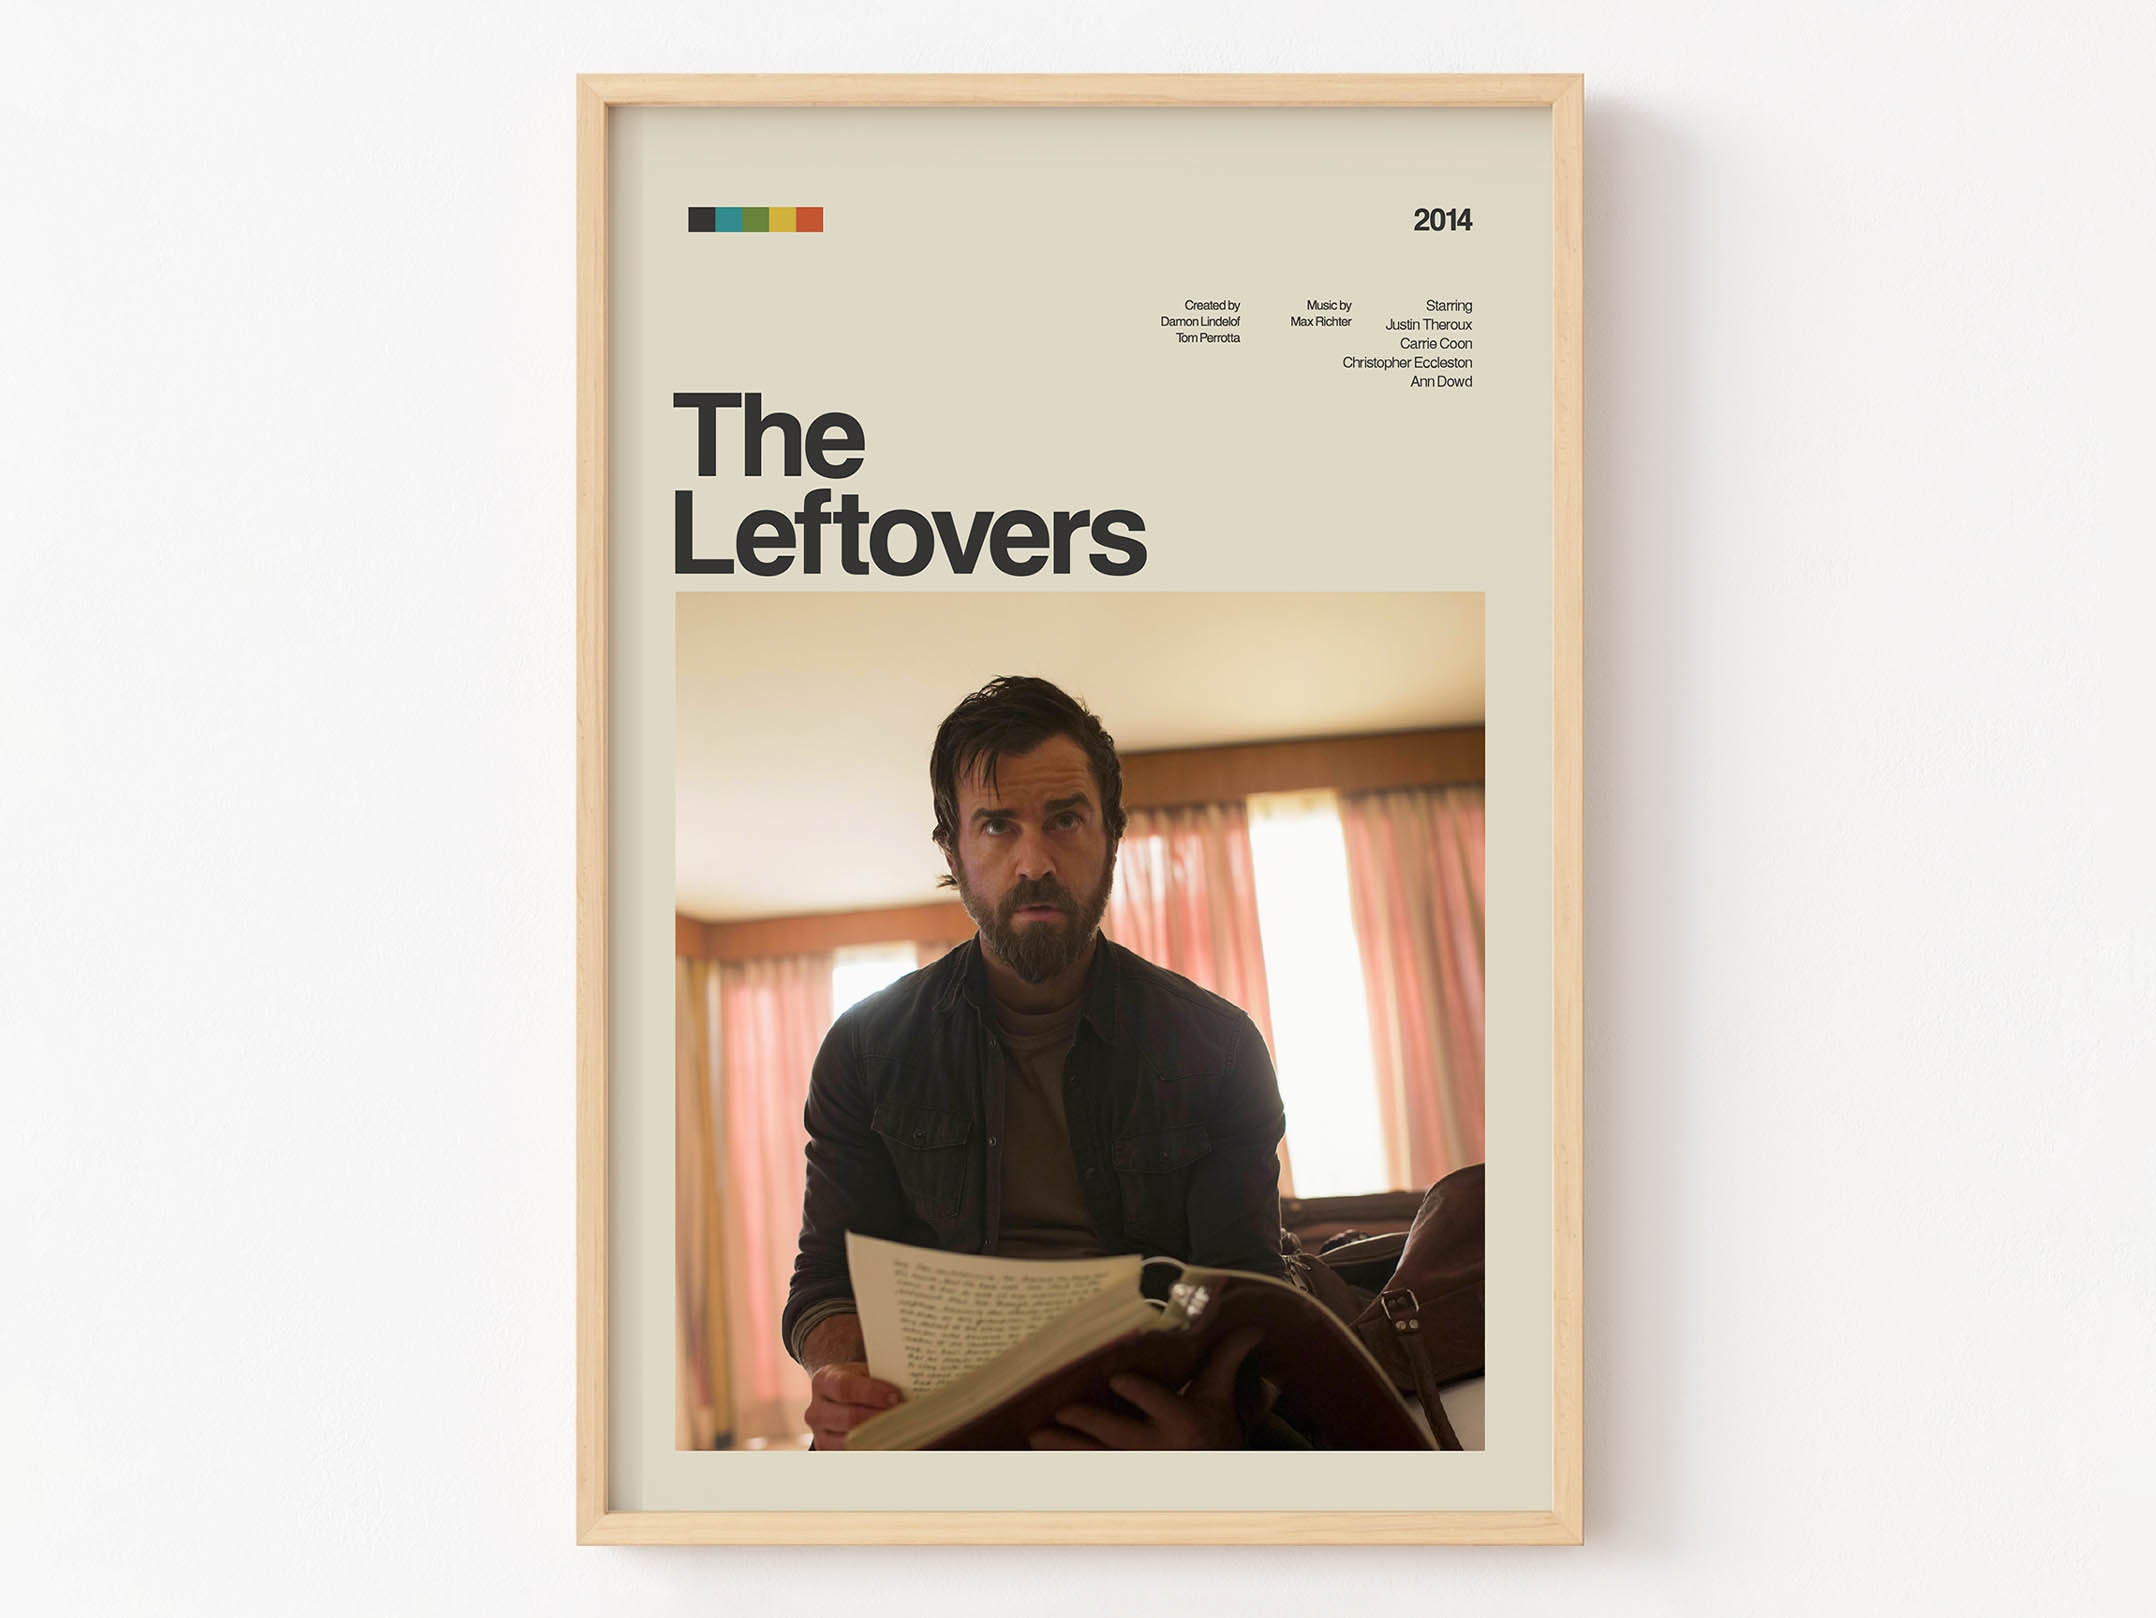 The Leftovers Poster Print No:2, Tv Show Poster